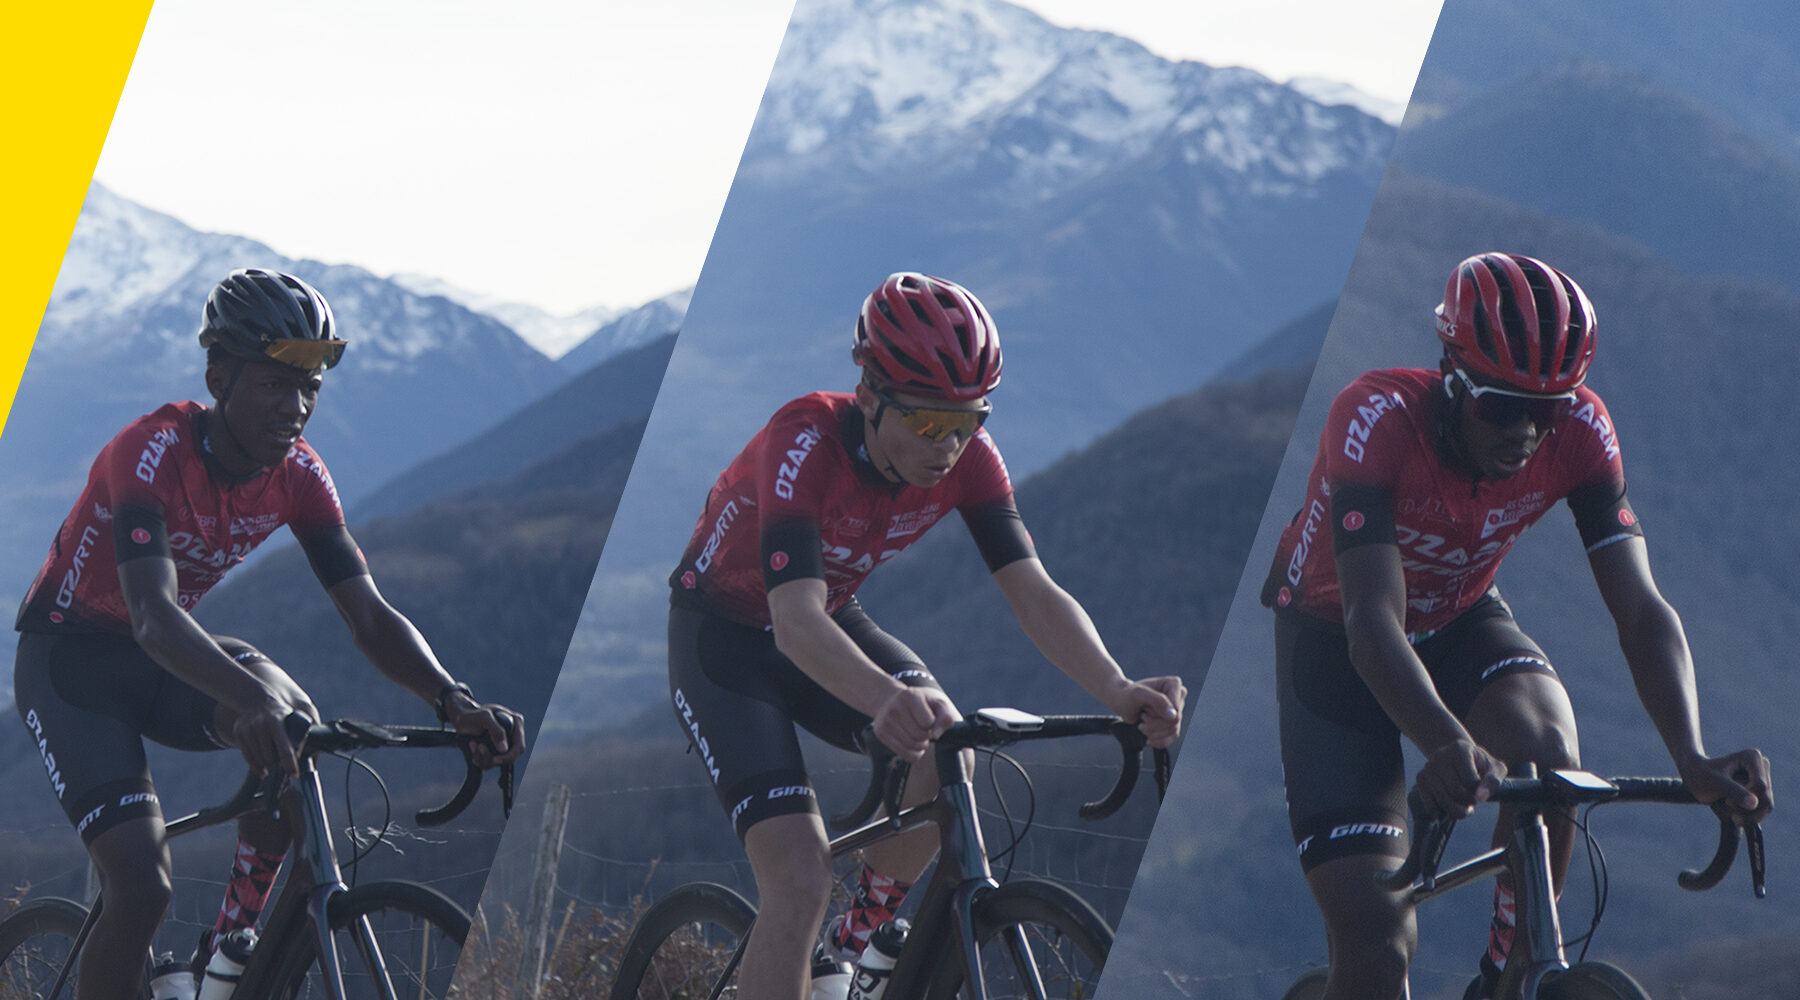 TEAM-Ozarm-Giant-Cycling-Team-U19-2024-Stage-Col-d-Aspin-Les-Pyrenees-Photo-Pierre-Nomertin